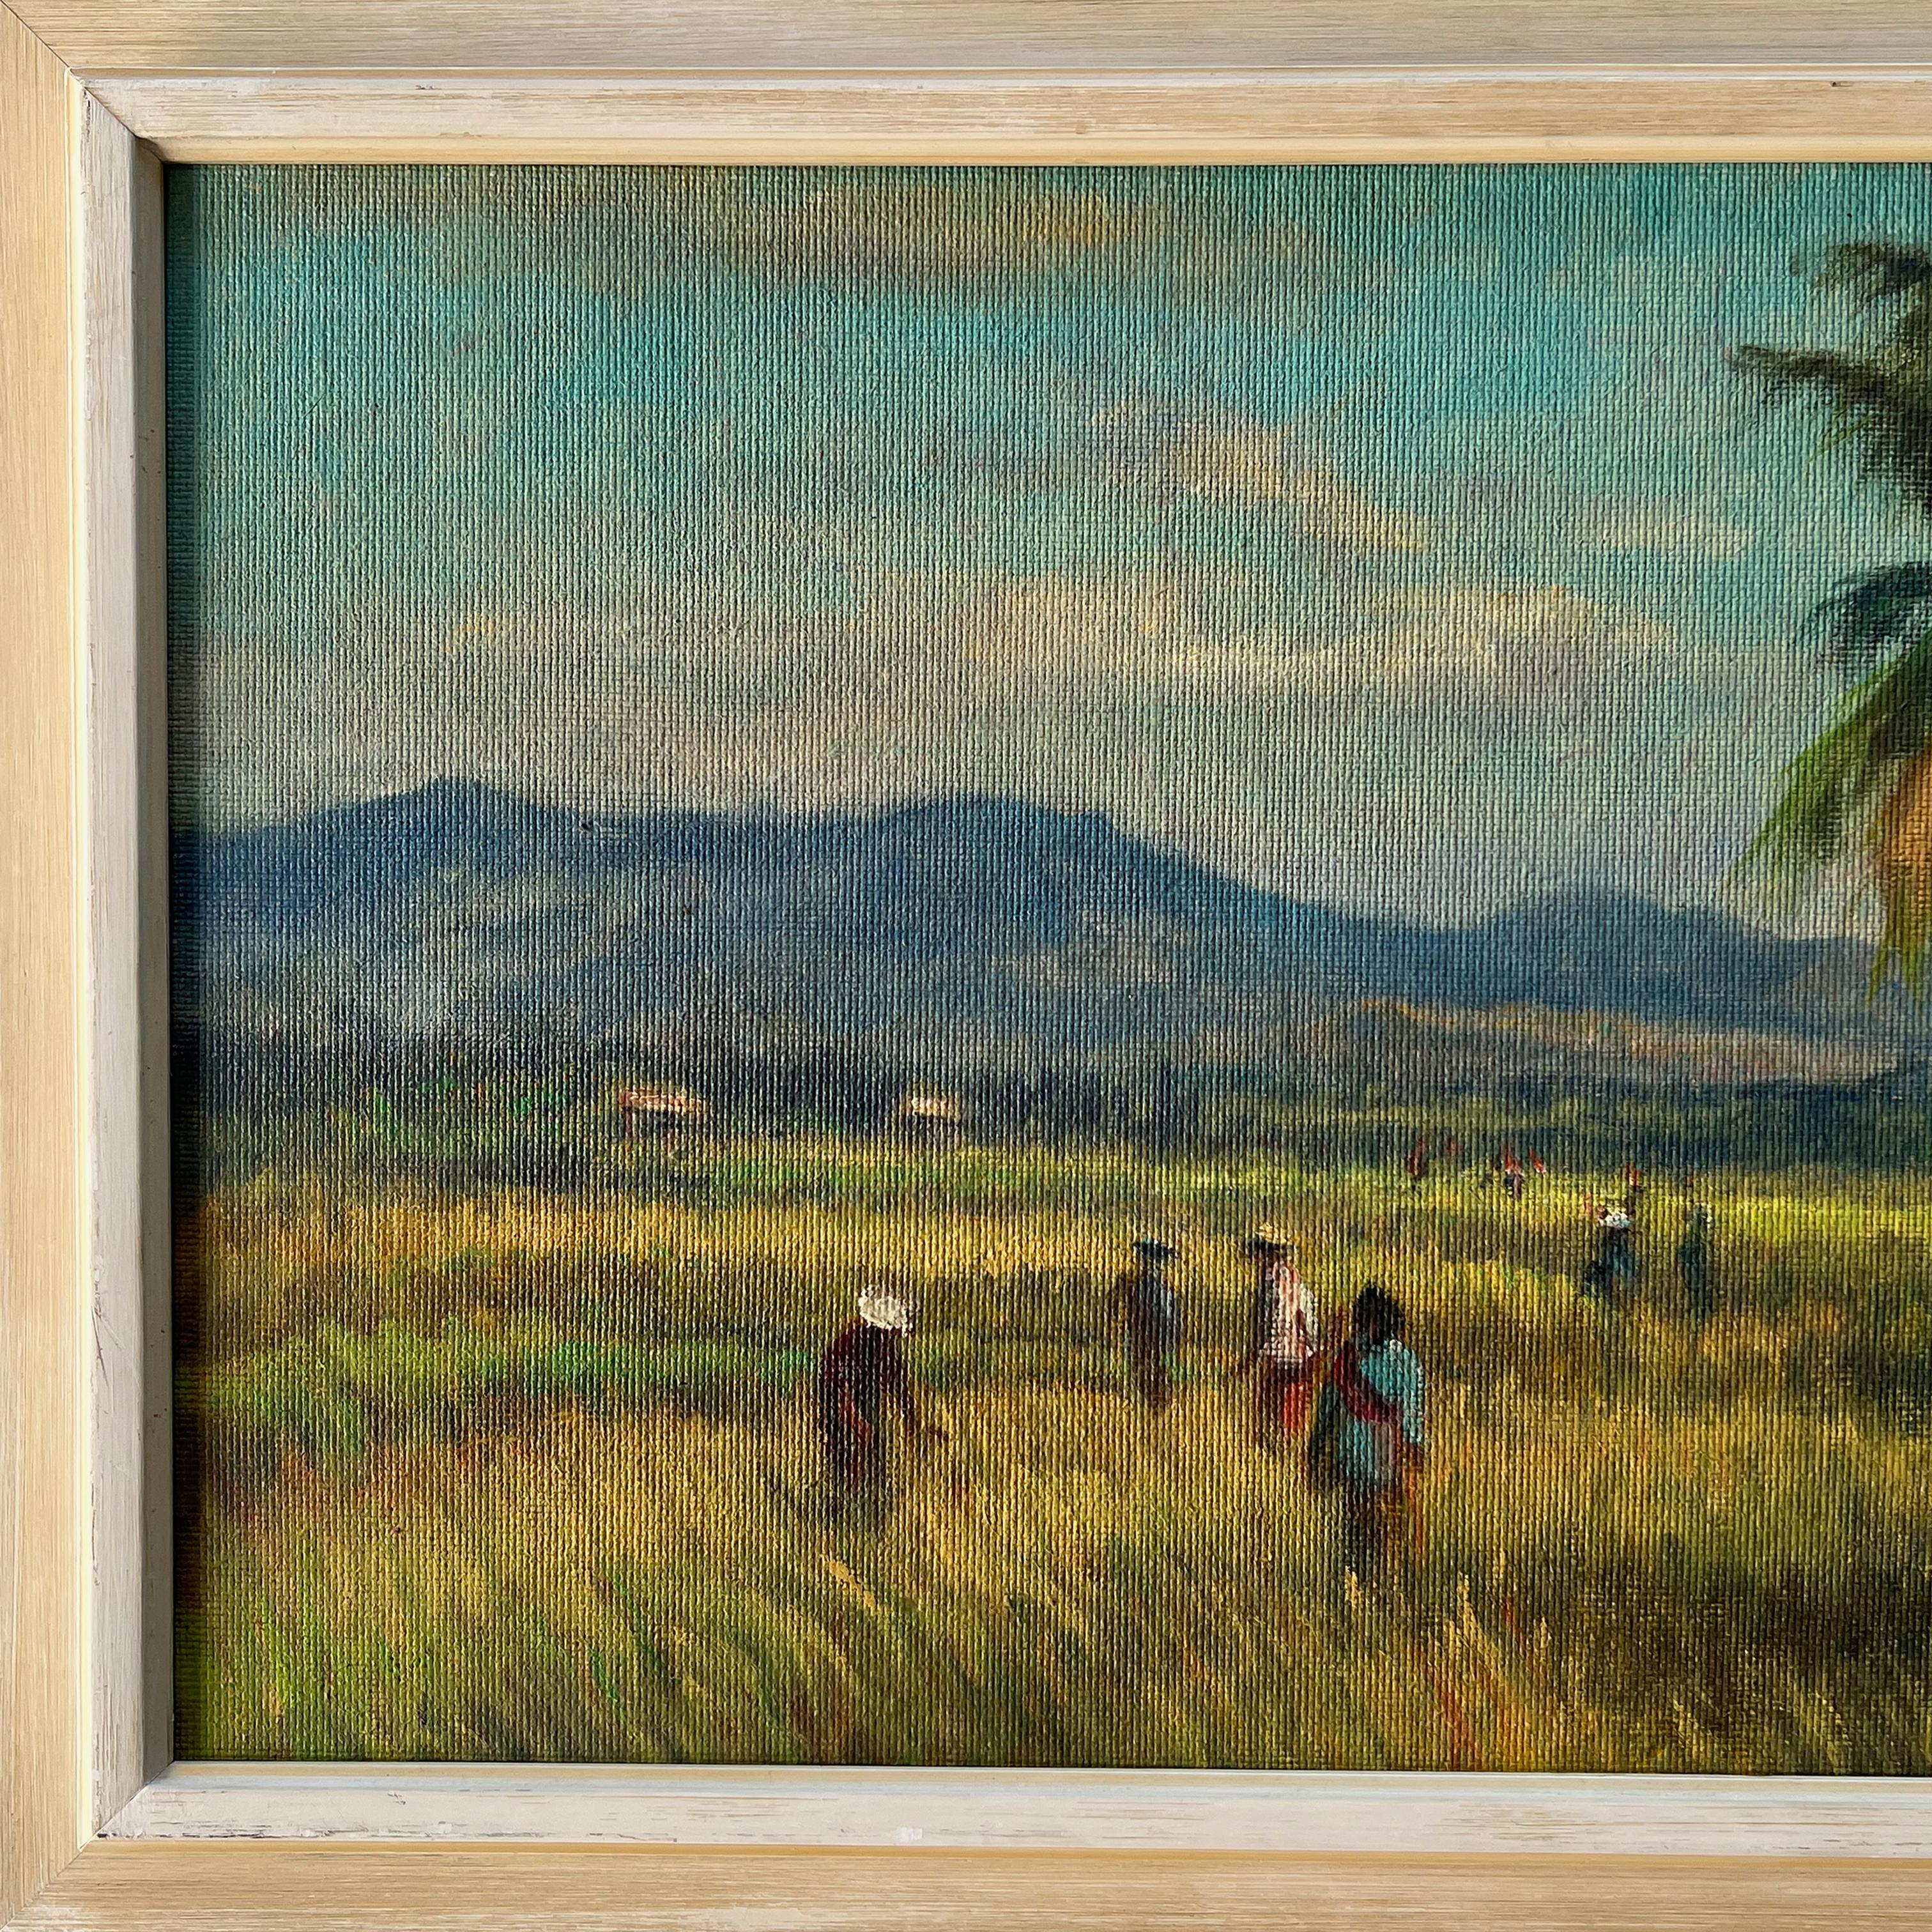 This atmospheric oil painting on panel depicts figures engaged in daily life in rice fields with a mountain range in the distance. Signed in the lower right (signature not legible) and presented in the original '50s frame. This painting was created